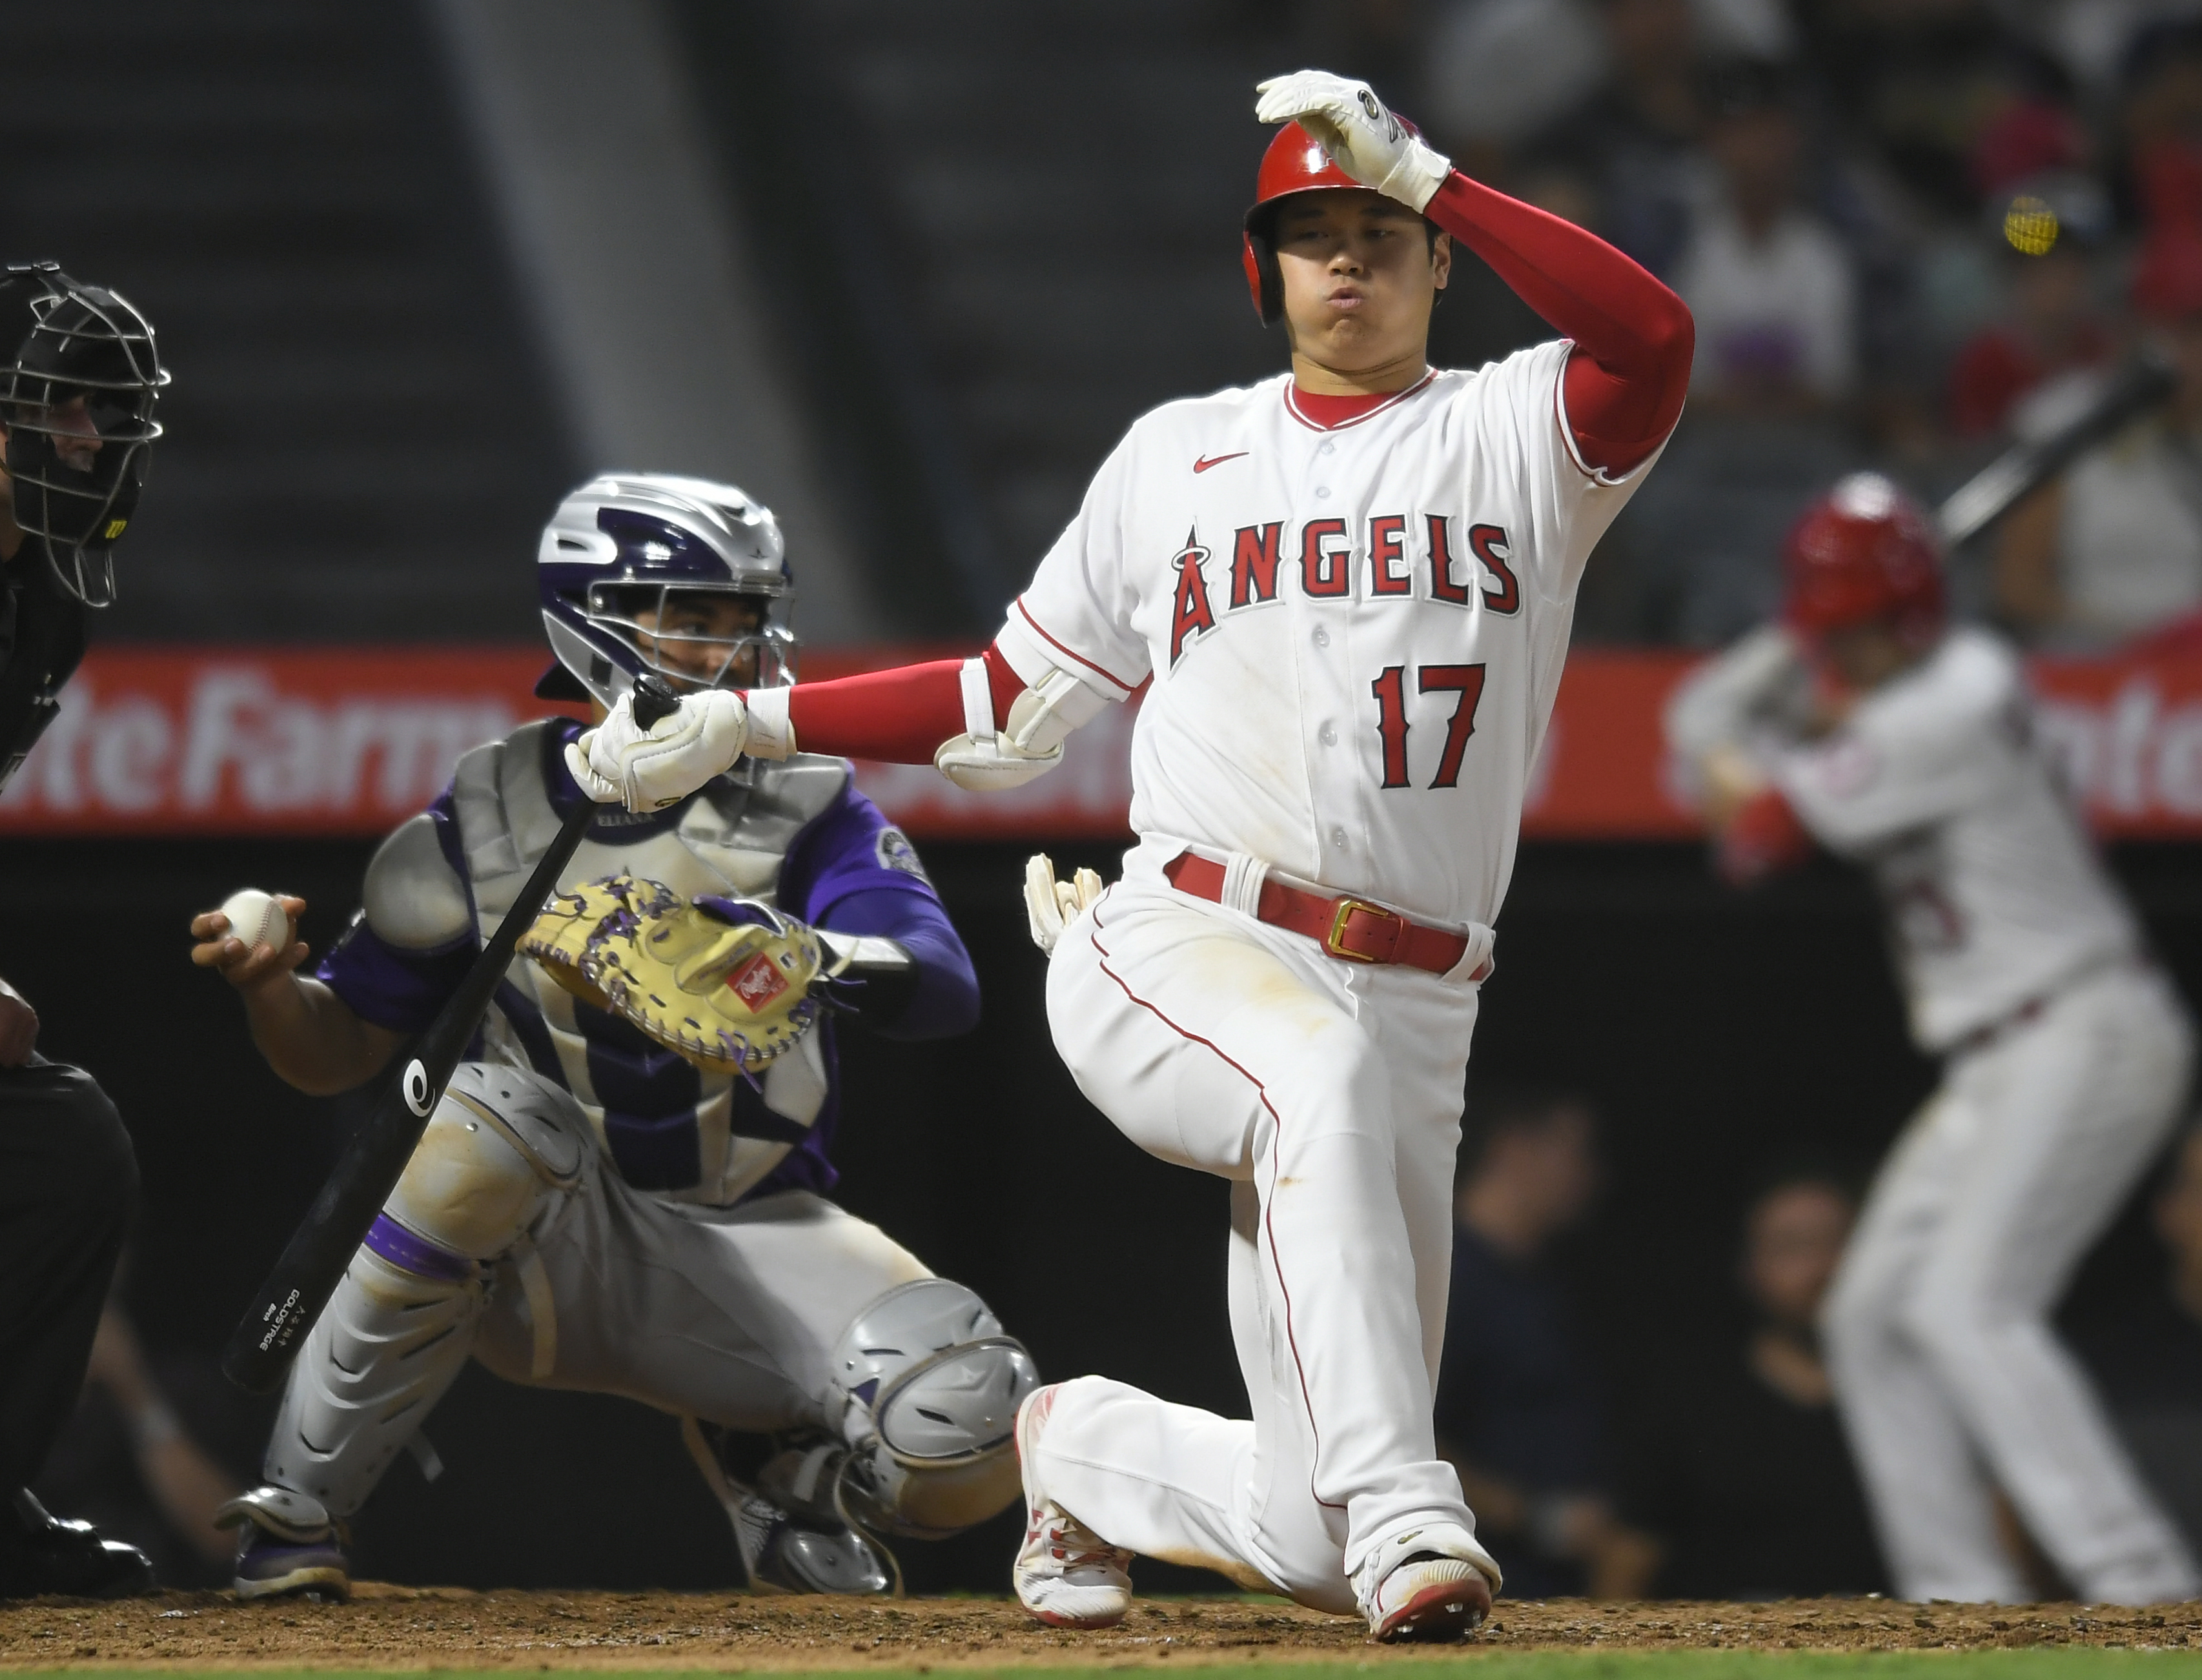 Los Angeles Angels - Welcome to the bigs, Jared Walsh!